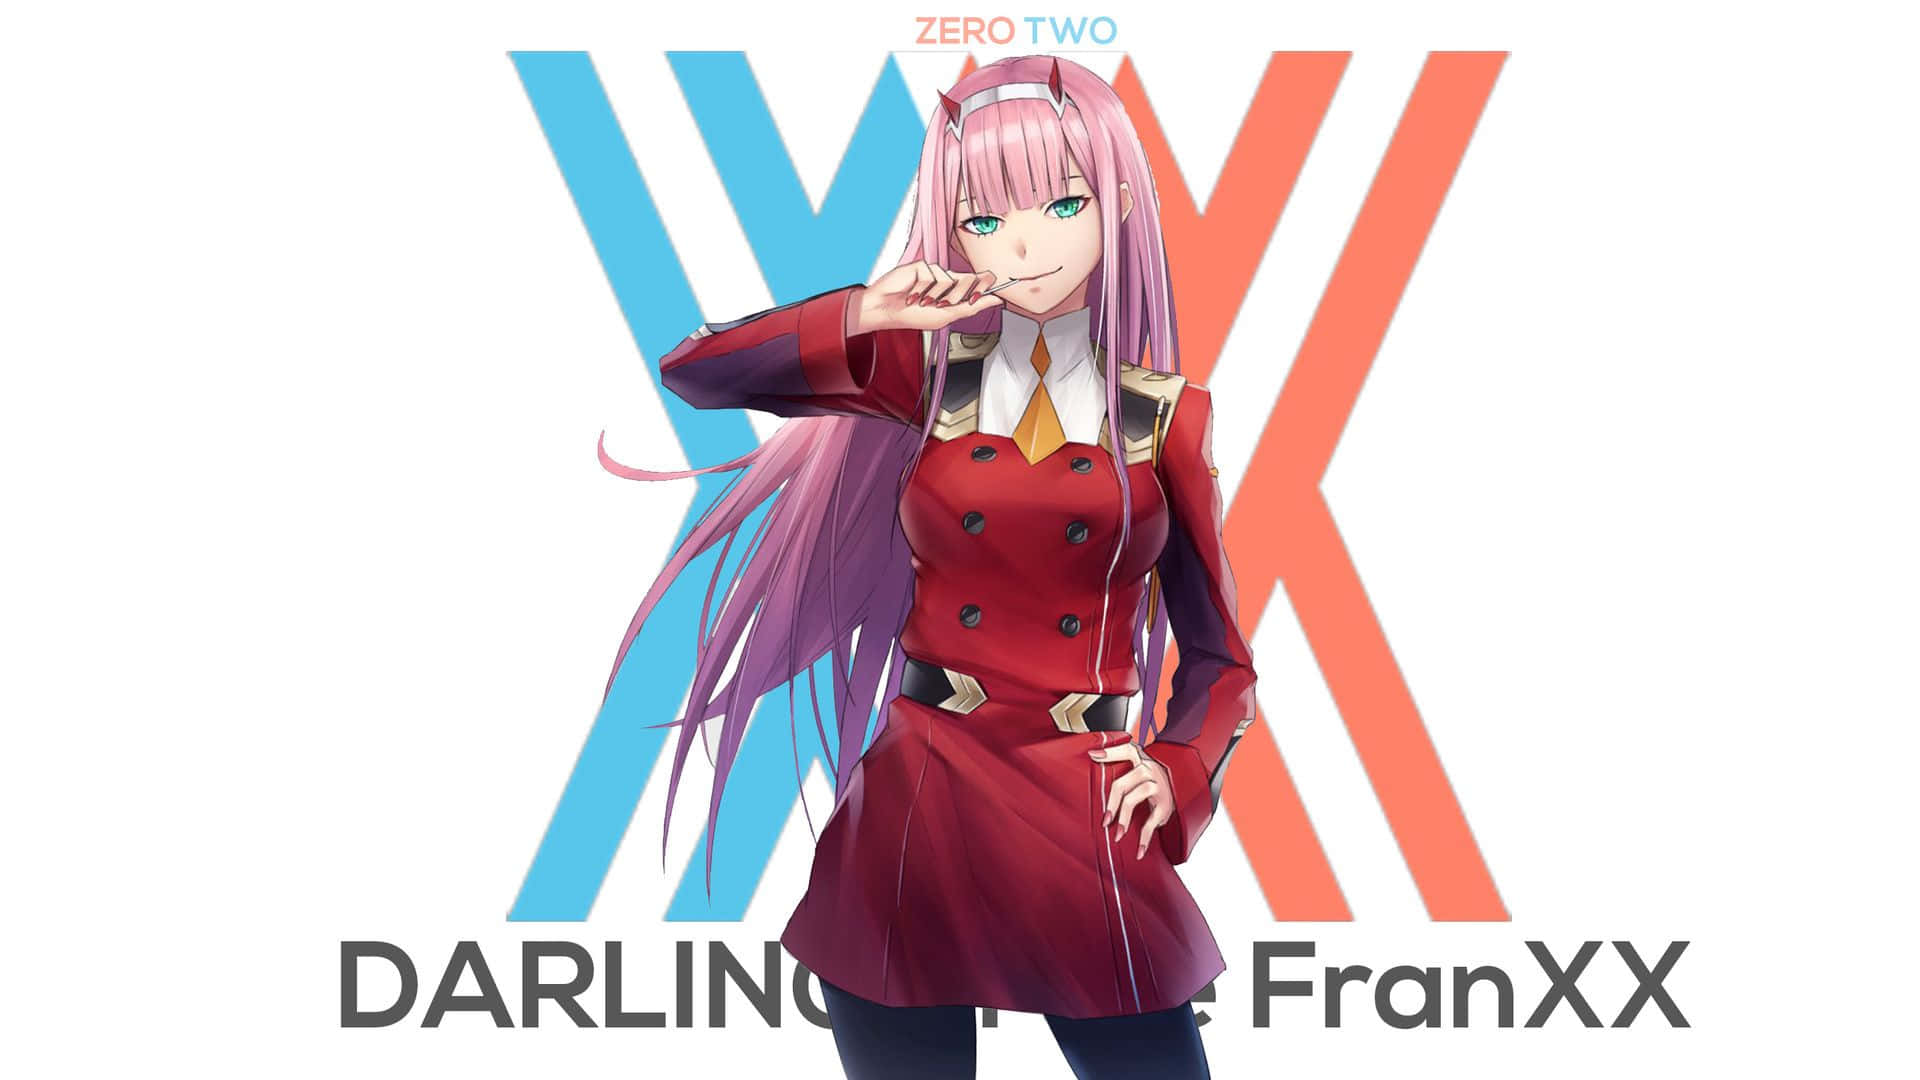 Zero Two and Hiro in a loving embrace in Darling in the Franxx